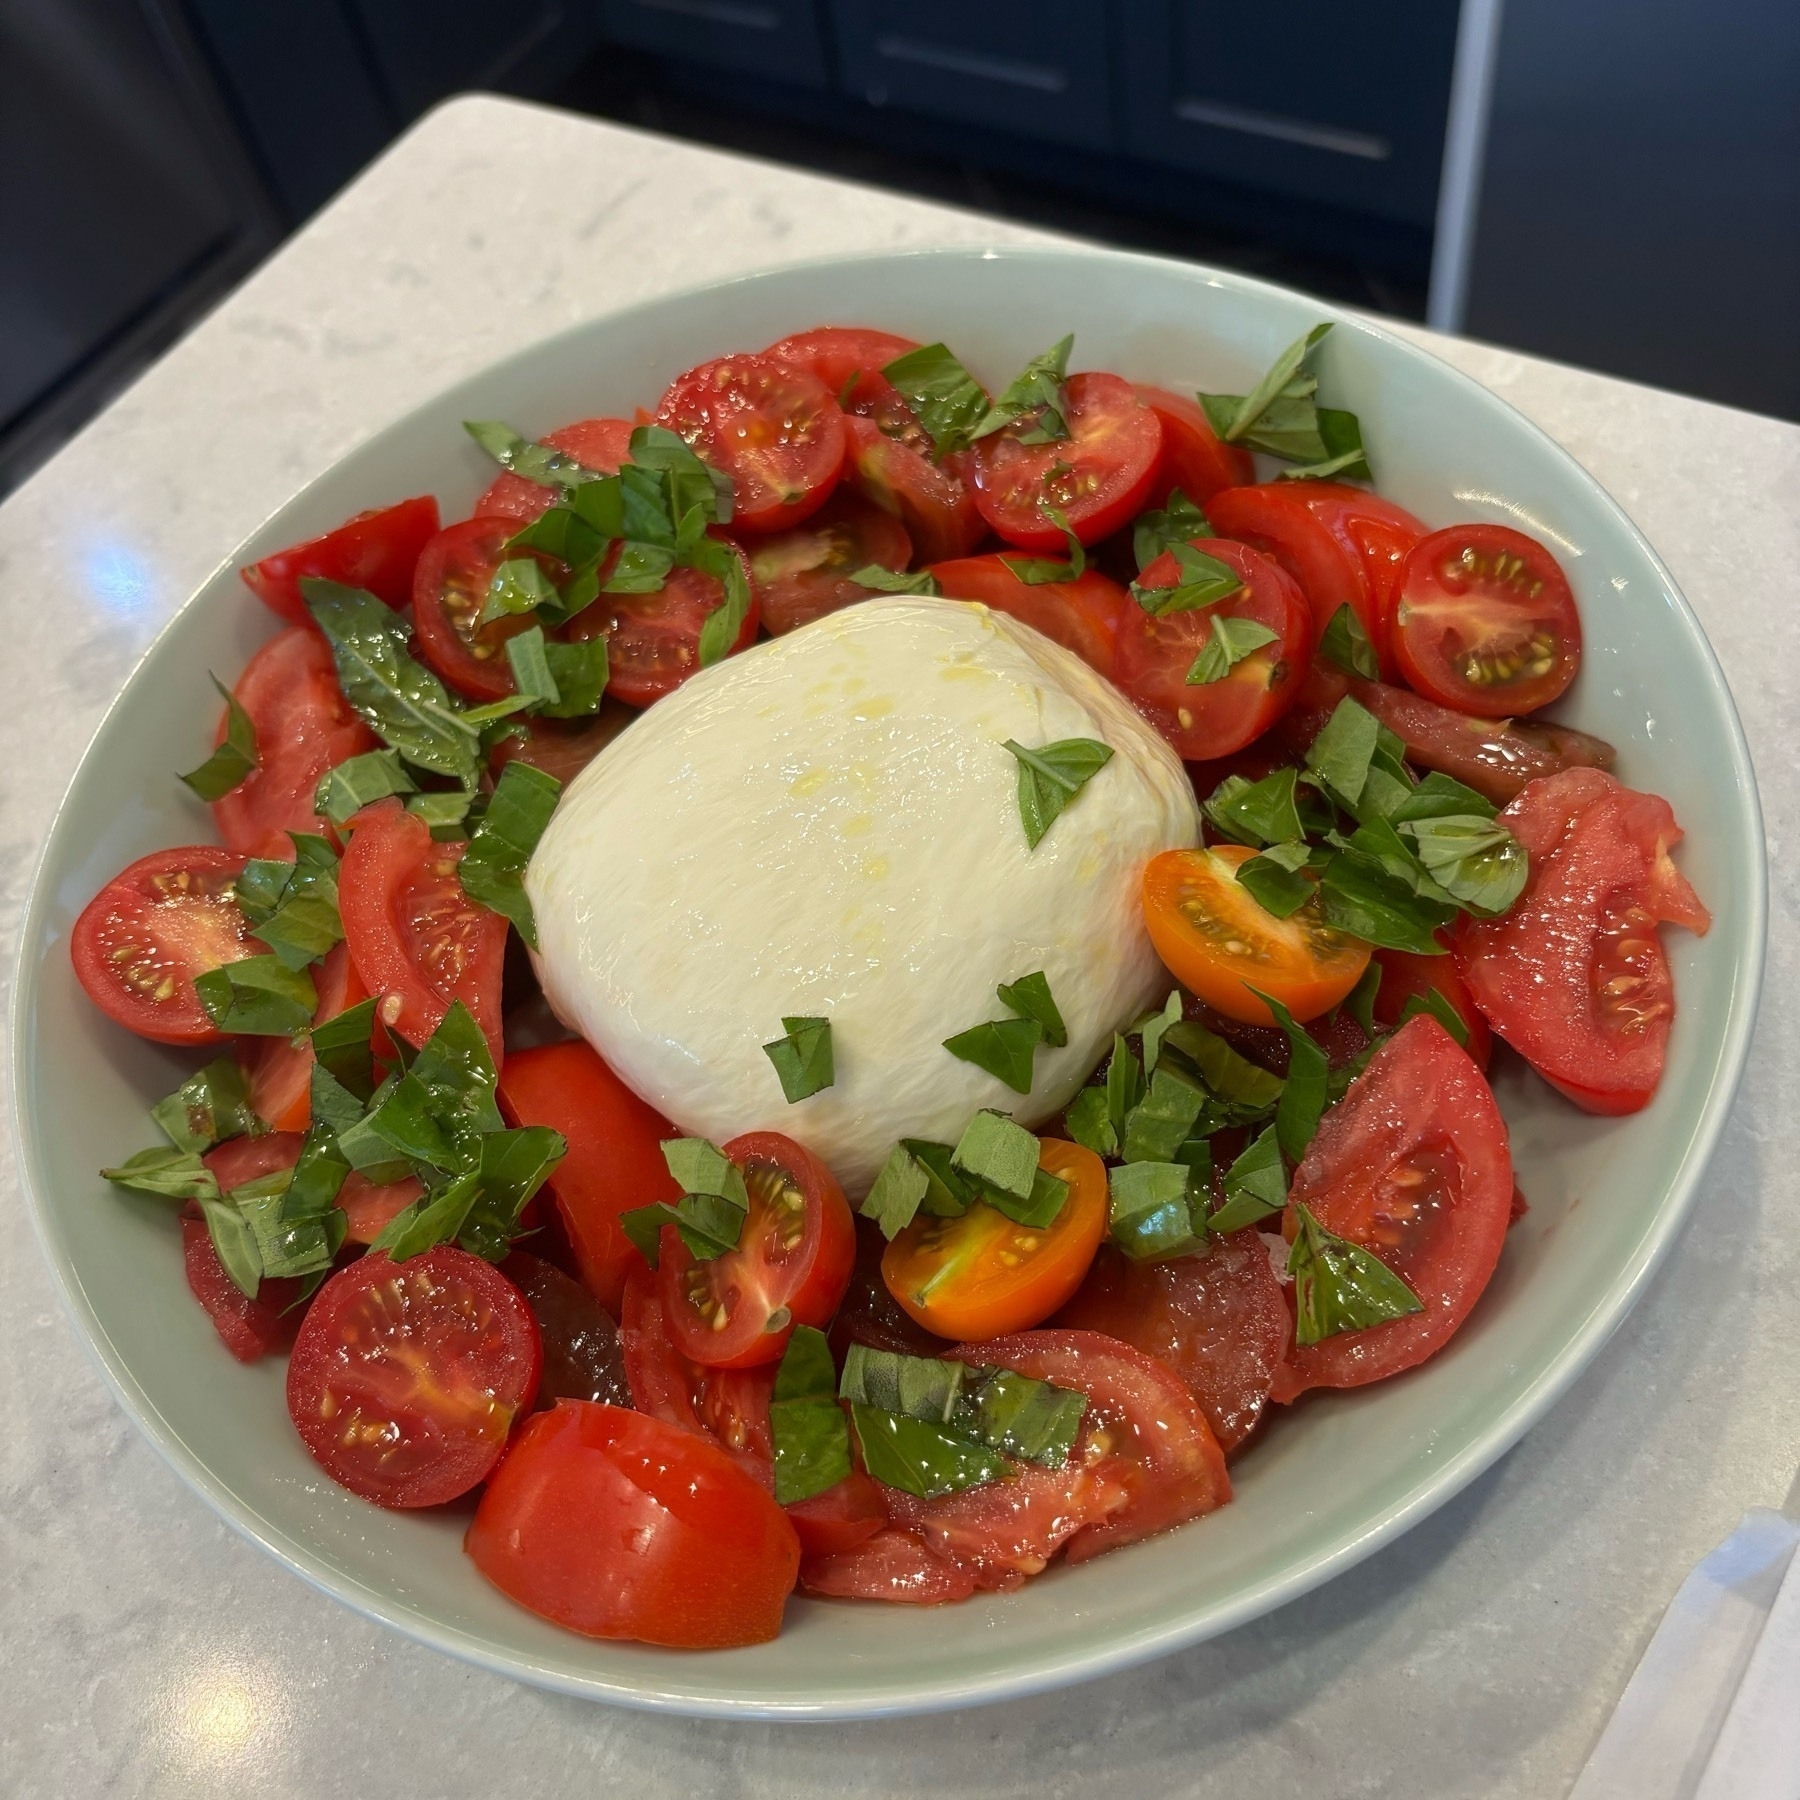 A bowl full of cut tomatoes, arranged around a chunk of burrata cheese, and sprinkled with chopped basil. Yum...